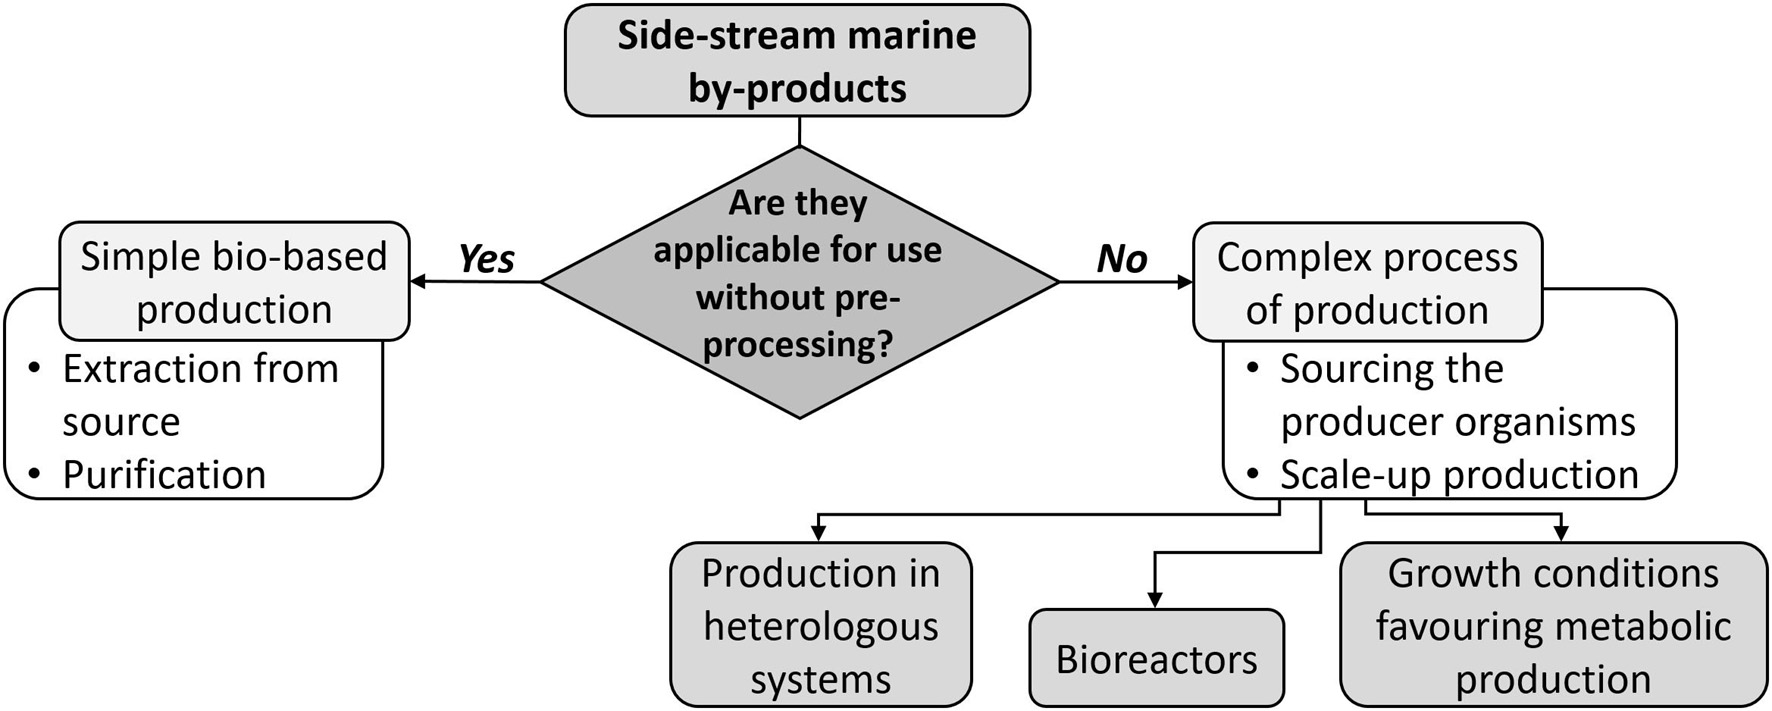 Frontiers | Valorization of Marine Waste: Use of Industrial By